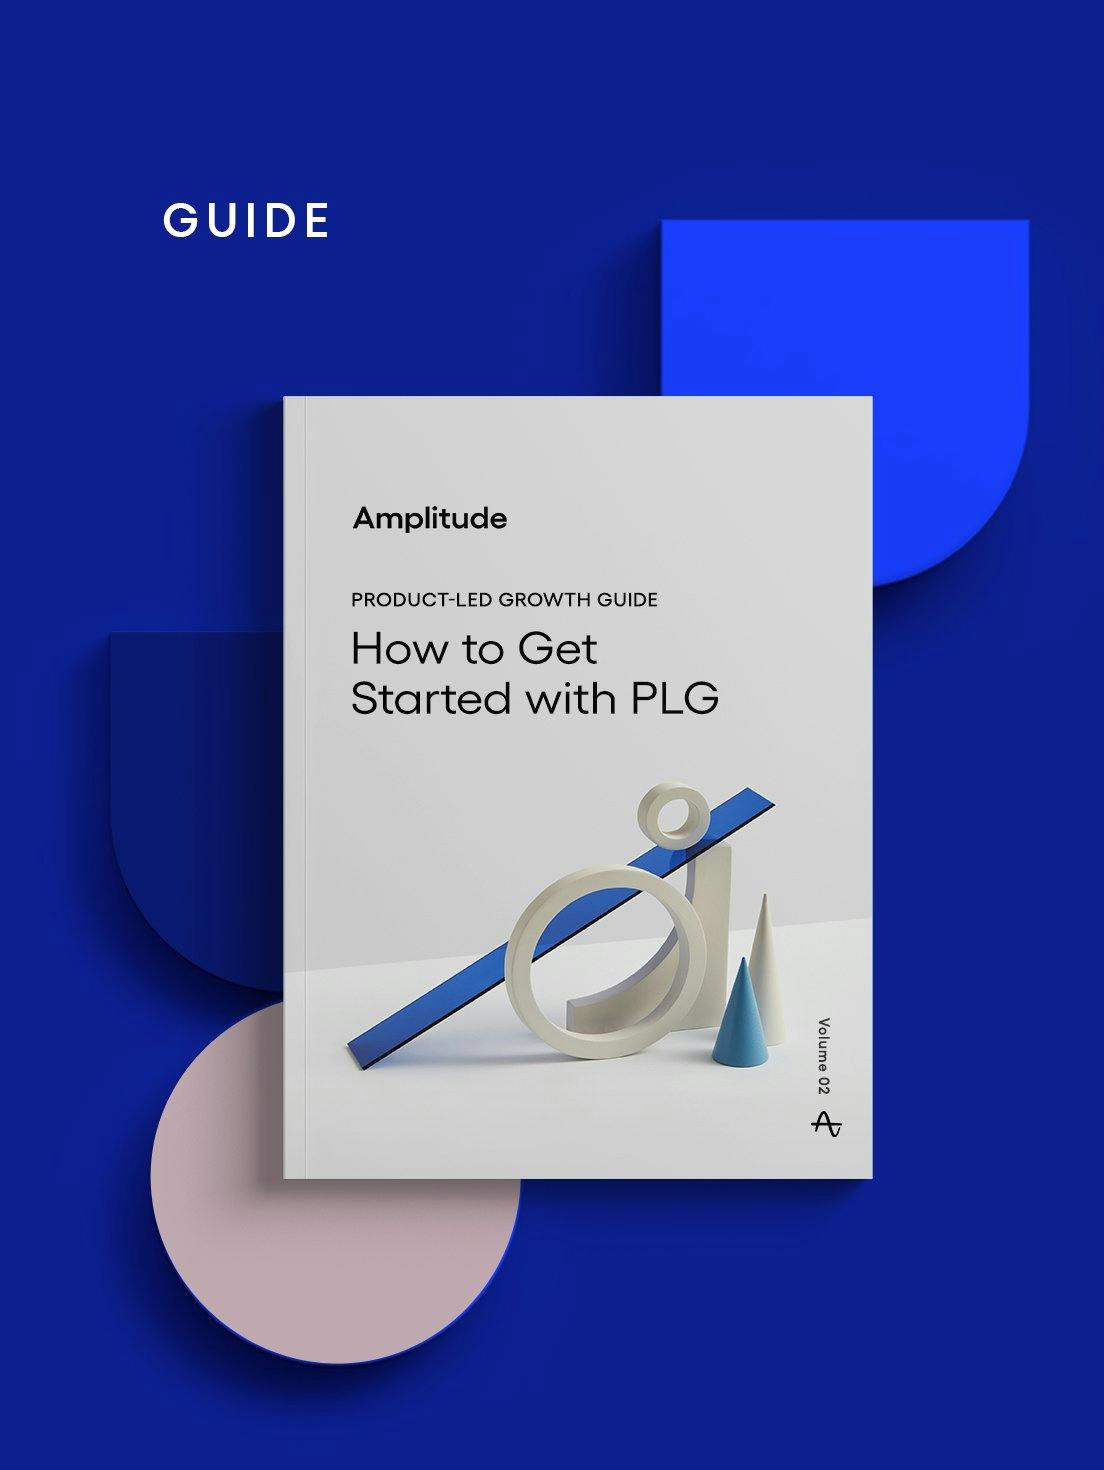 Product-Led Growth Guide Volume 2: How to Get Started with PLG